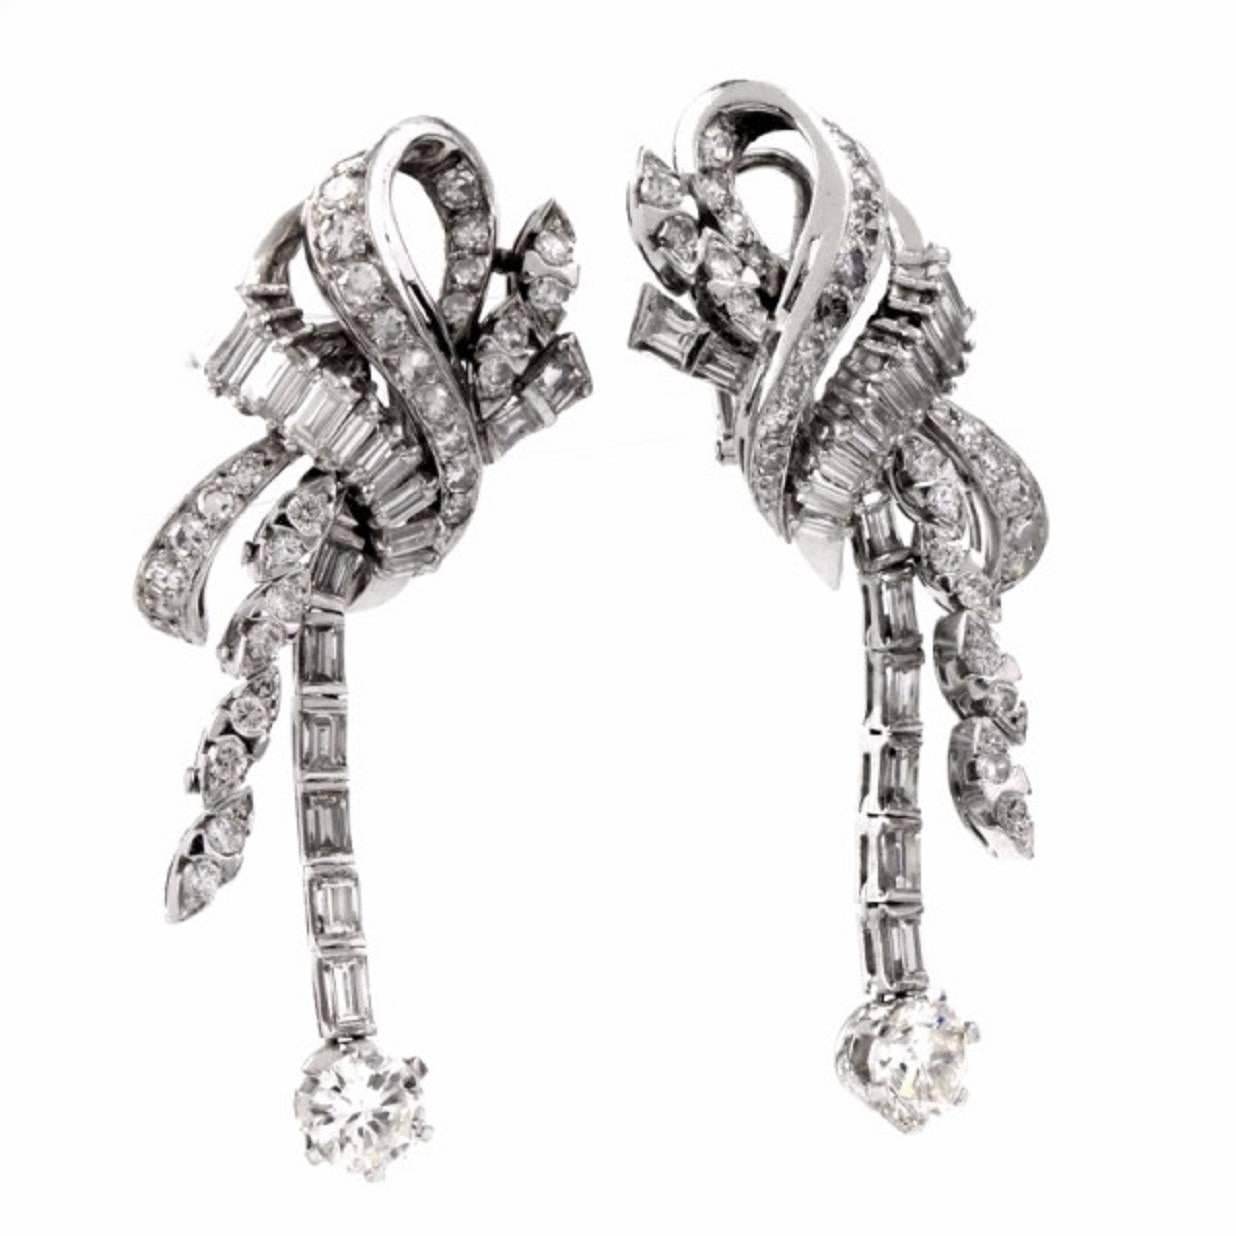 These fabulous vintage cluster drop earrings are crafted in solid platinum, weighing approx: 26.0 Grams and measuring approx: 54mm in length and 19mm in max width. Displaying a spectacular array of genuine round, marquise and emerald cut diamonds